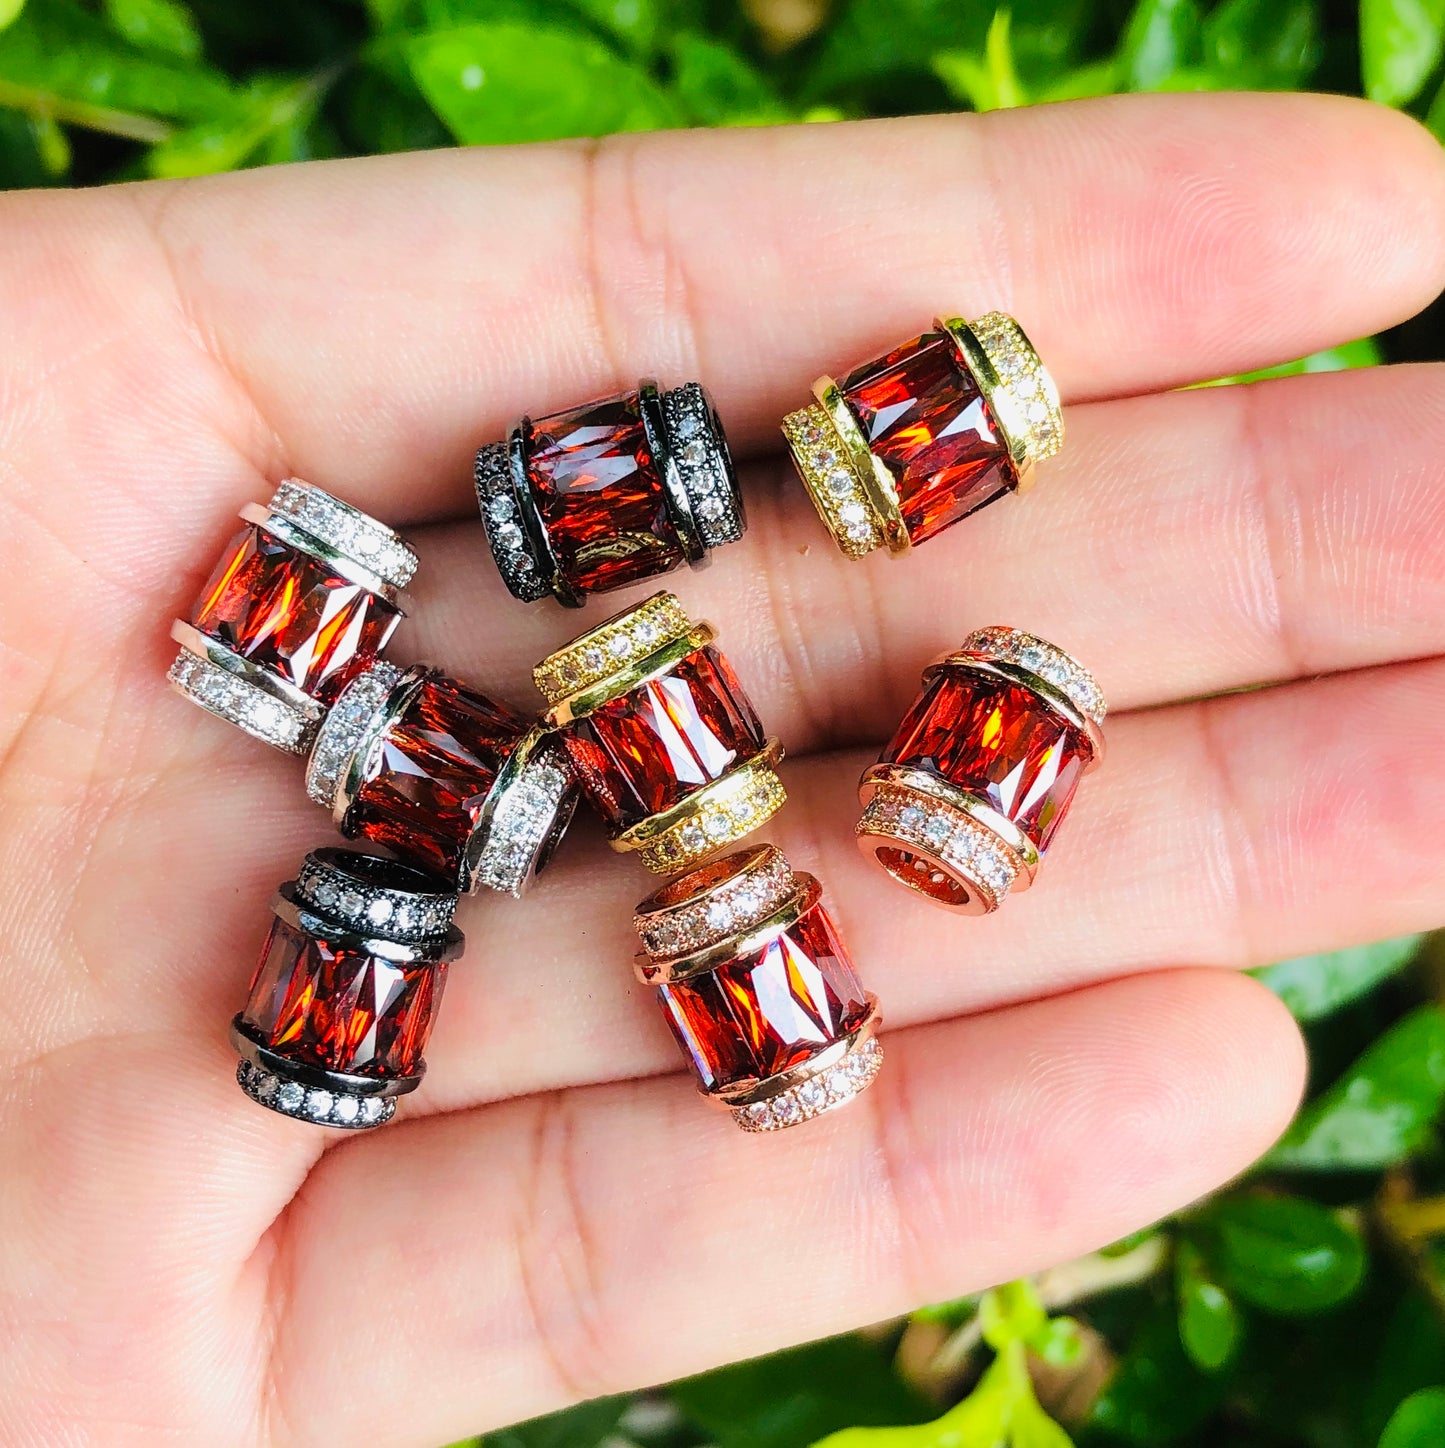 10pcs/lot 12*10mm Red CZ Paved Big Hole Spacers CZ Paved Spacers Big Hole Beads New Spacers Arrivals Charms Beads Beyond